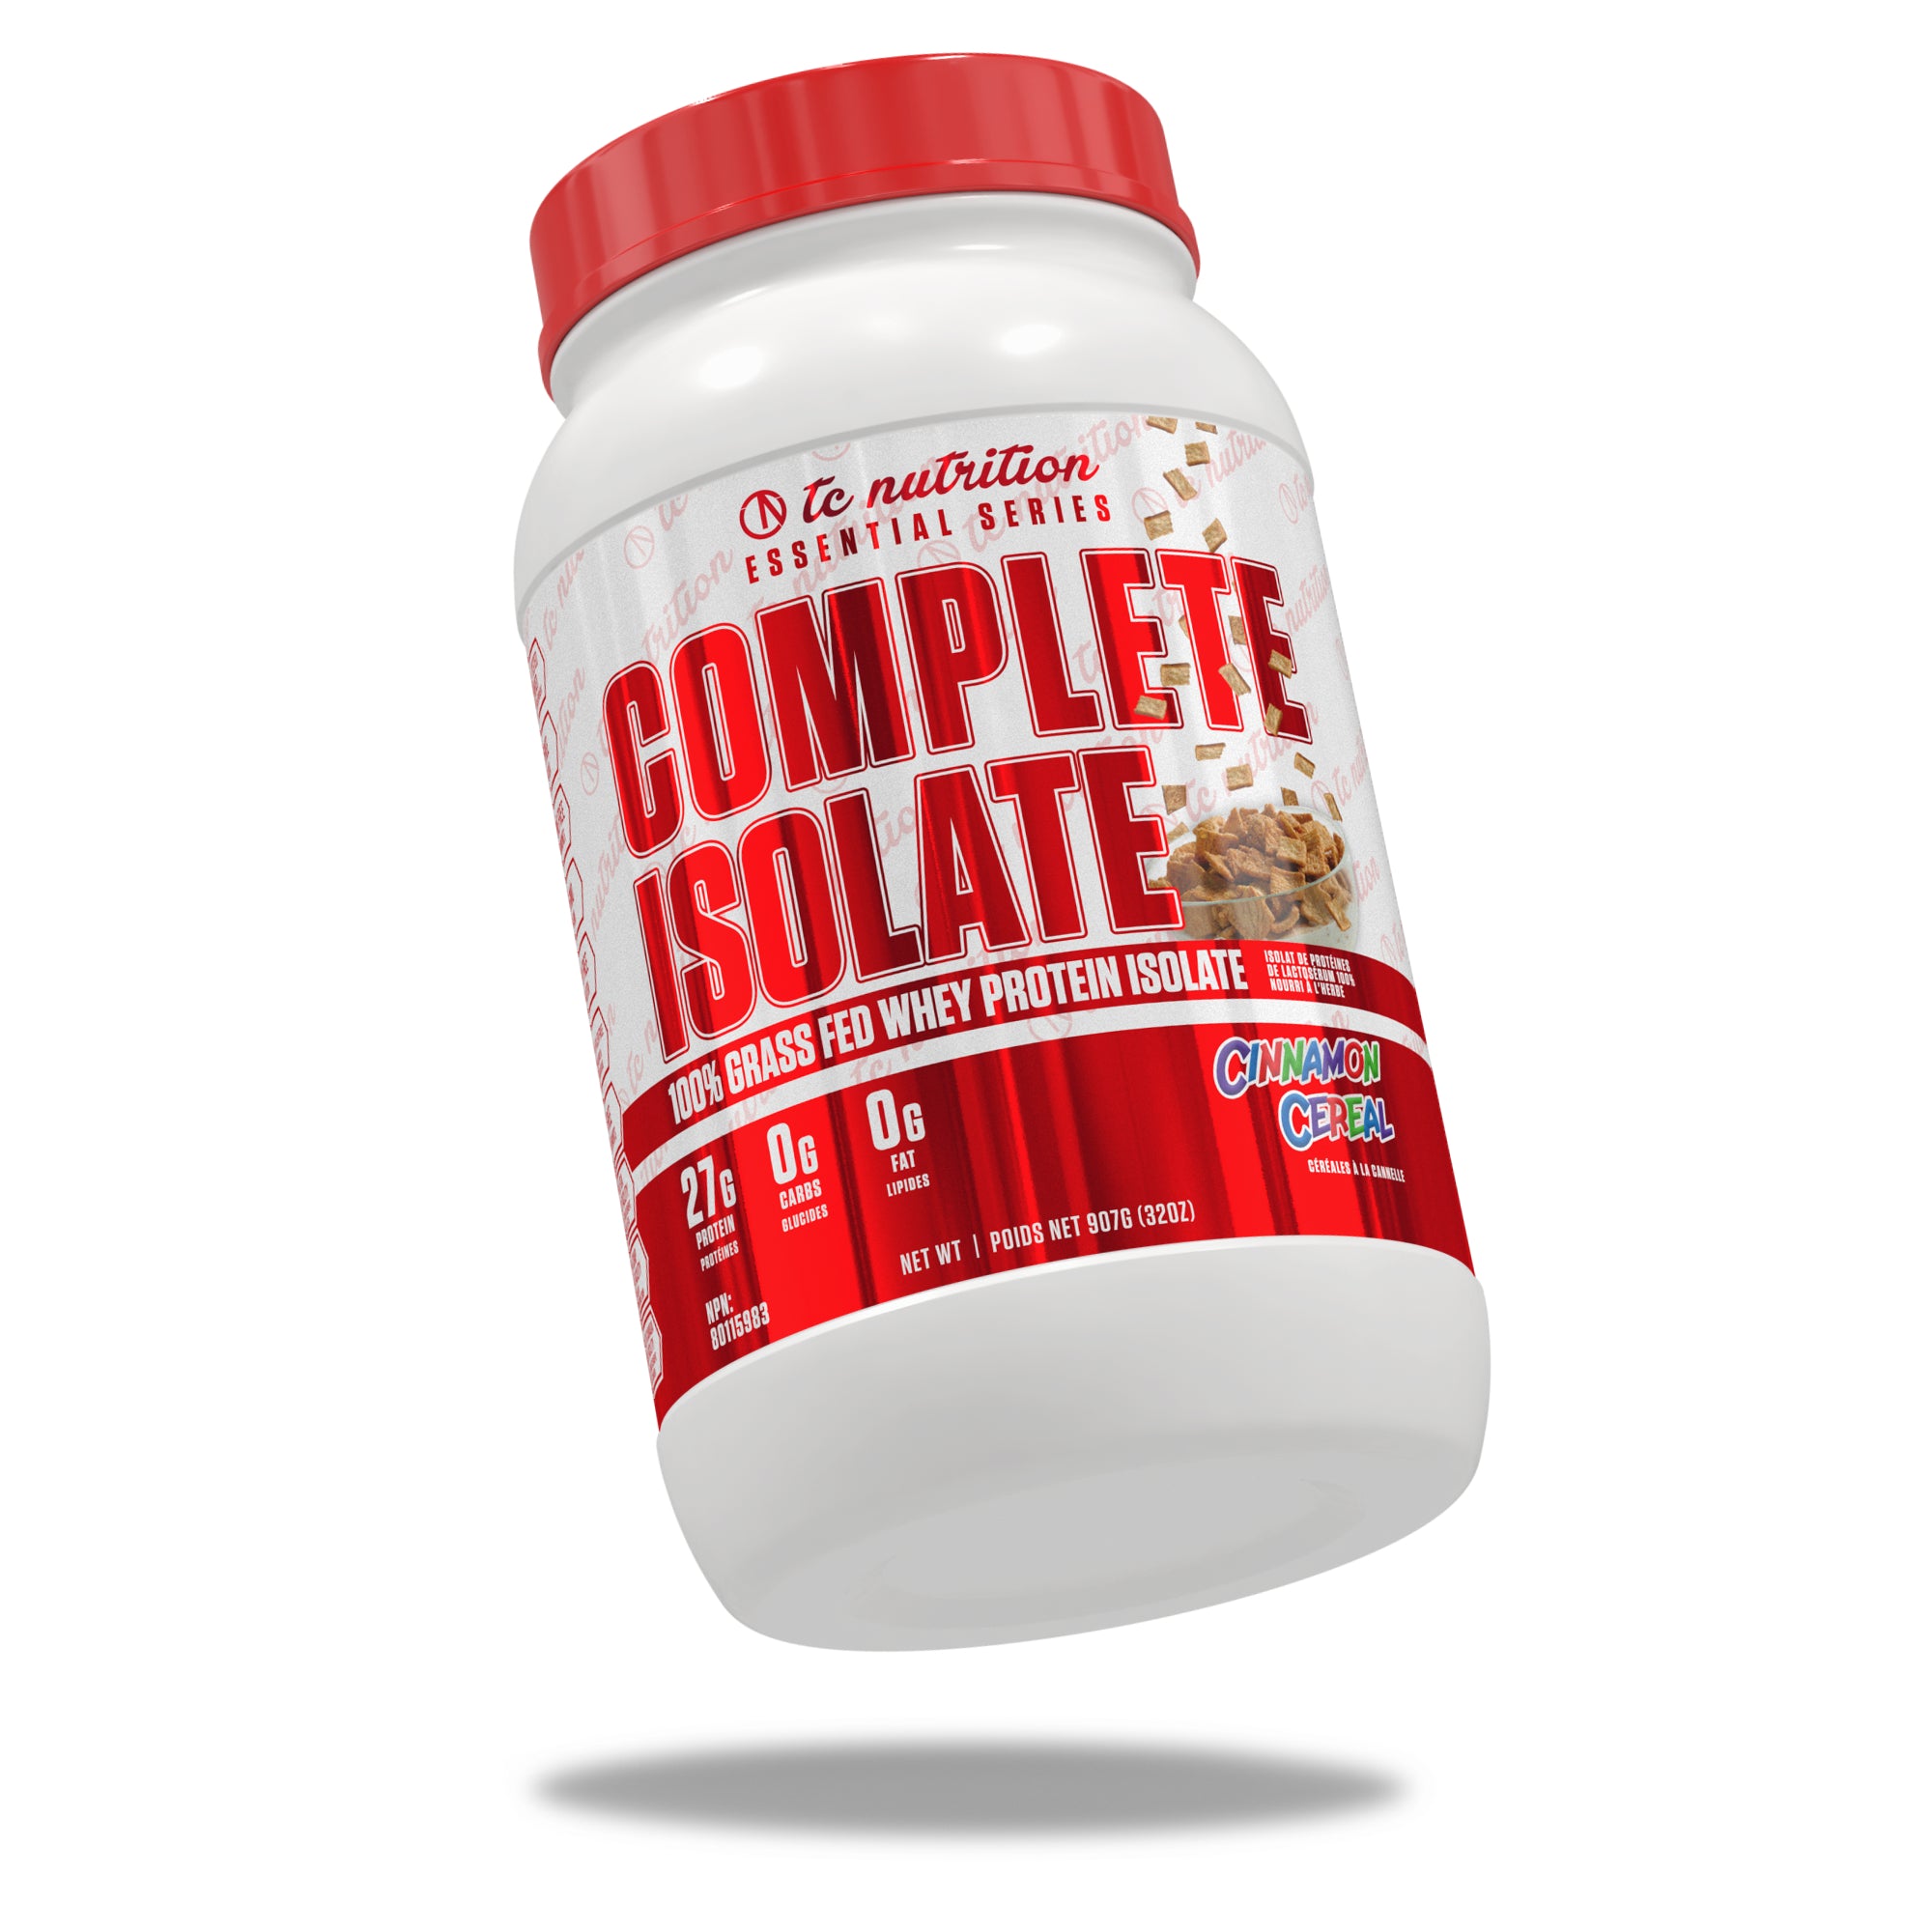 grass fed whey protein isolate+